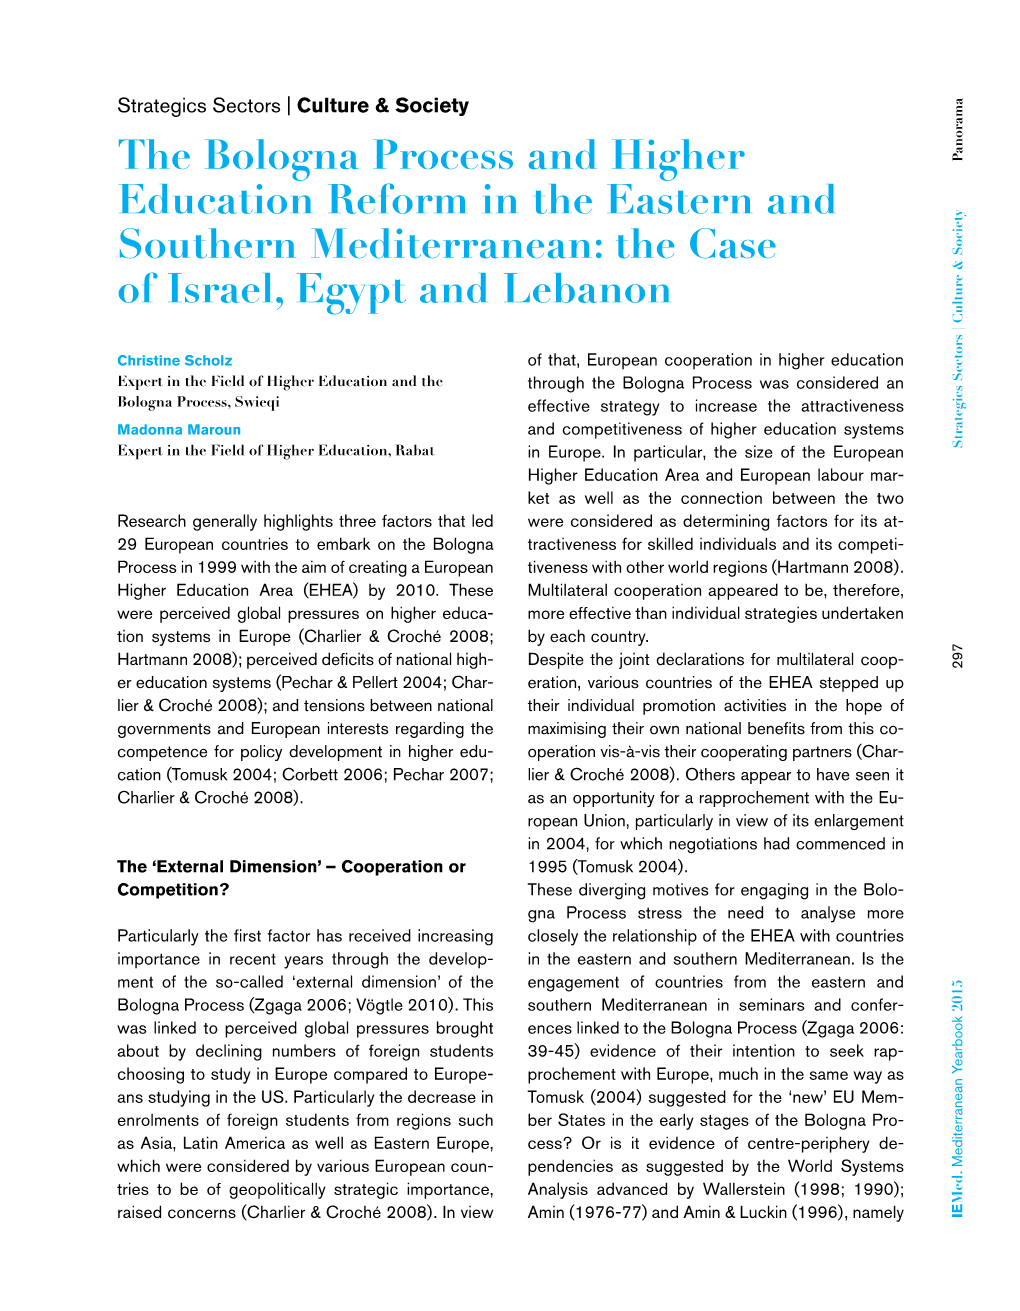 The Bologna Process and Higher Education Reform in the Eastern and Southern Mediterranean